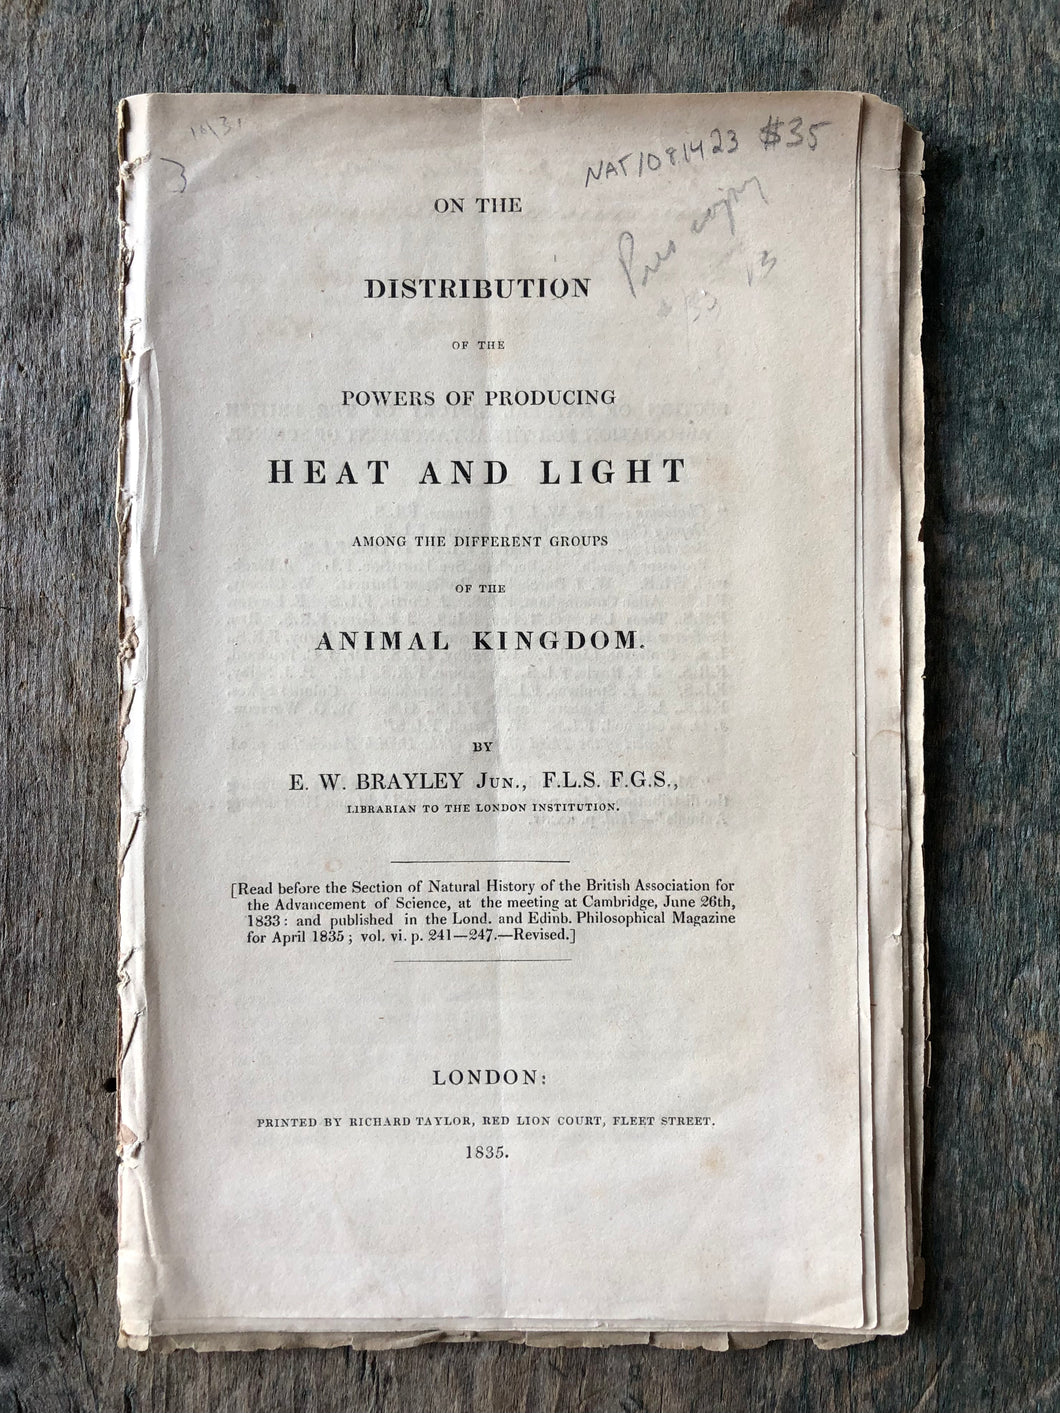 On the Distribution of the Powers of Producing Heat and Light Among the Different Groups of the Animal Kingdom bound with Nature of Vision in the Invertebrate Animals by E. W. Bradley PRESENTATION COPY